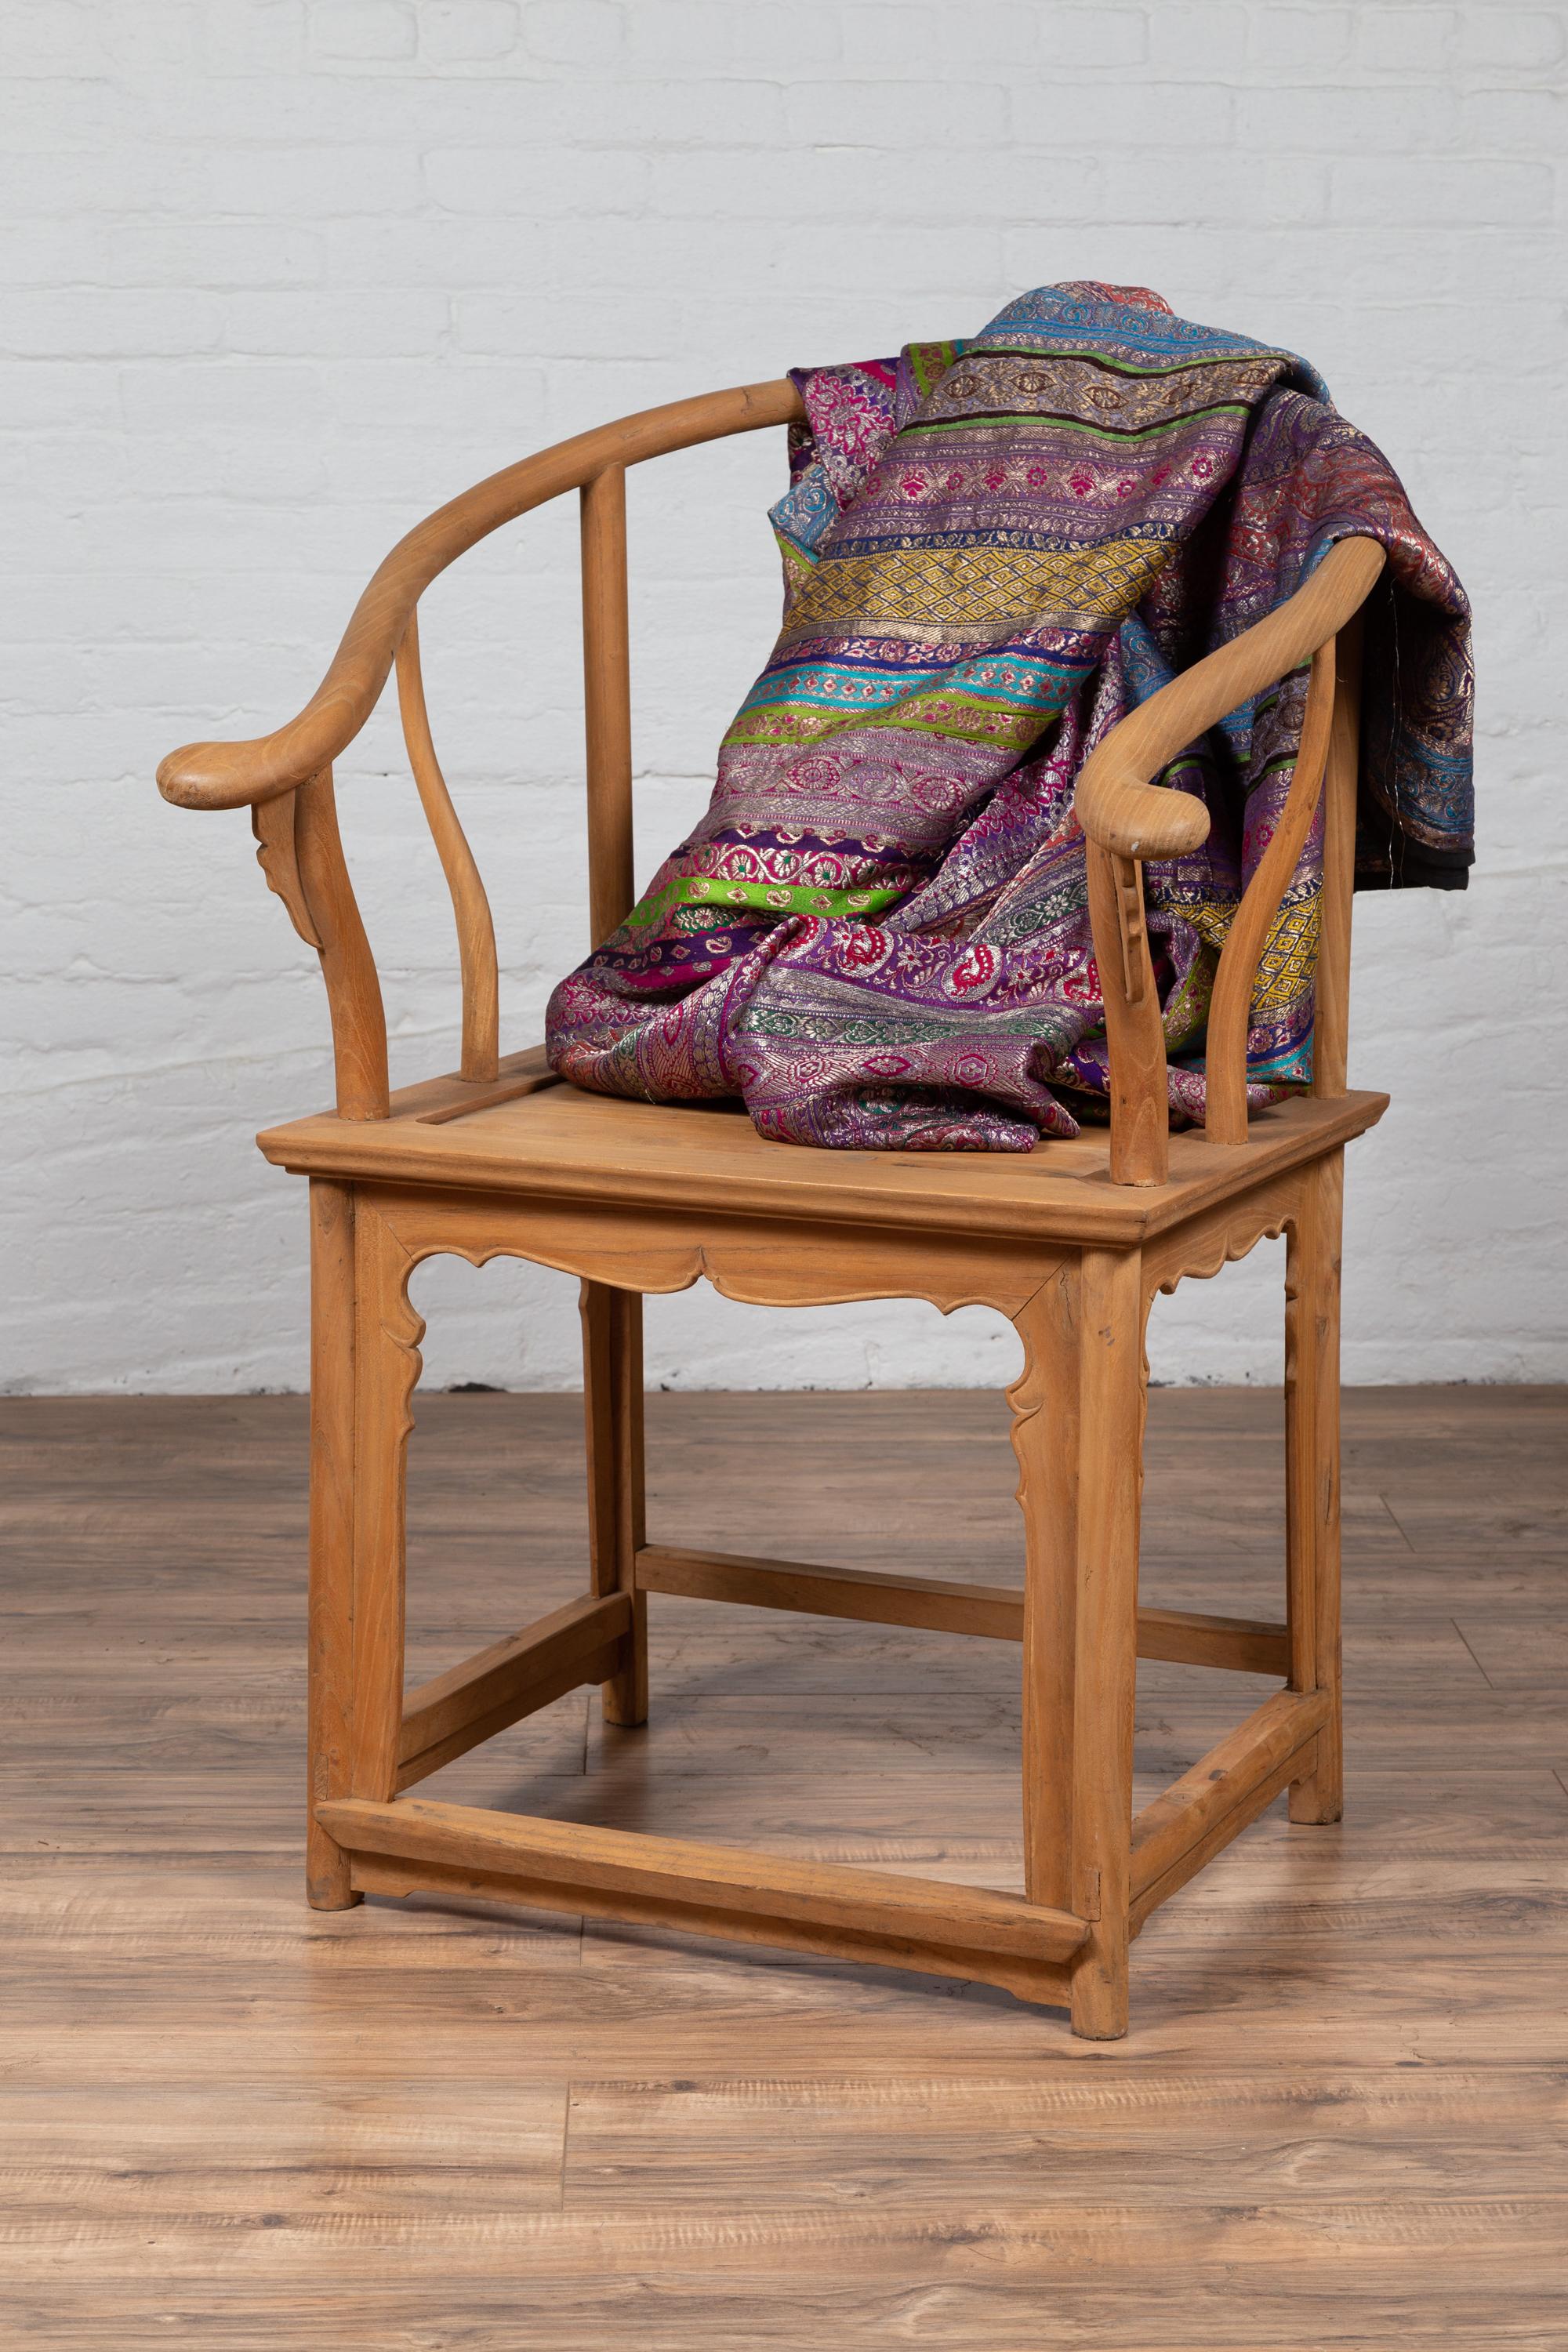 A Chinese vintage Ming dynasty style natural wood horseshoe back armchair from the mid-20th century, with carved splat and apron. Born in China during the midcentury period, this armchair charms our eyes with its natural wooden finish and graceful